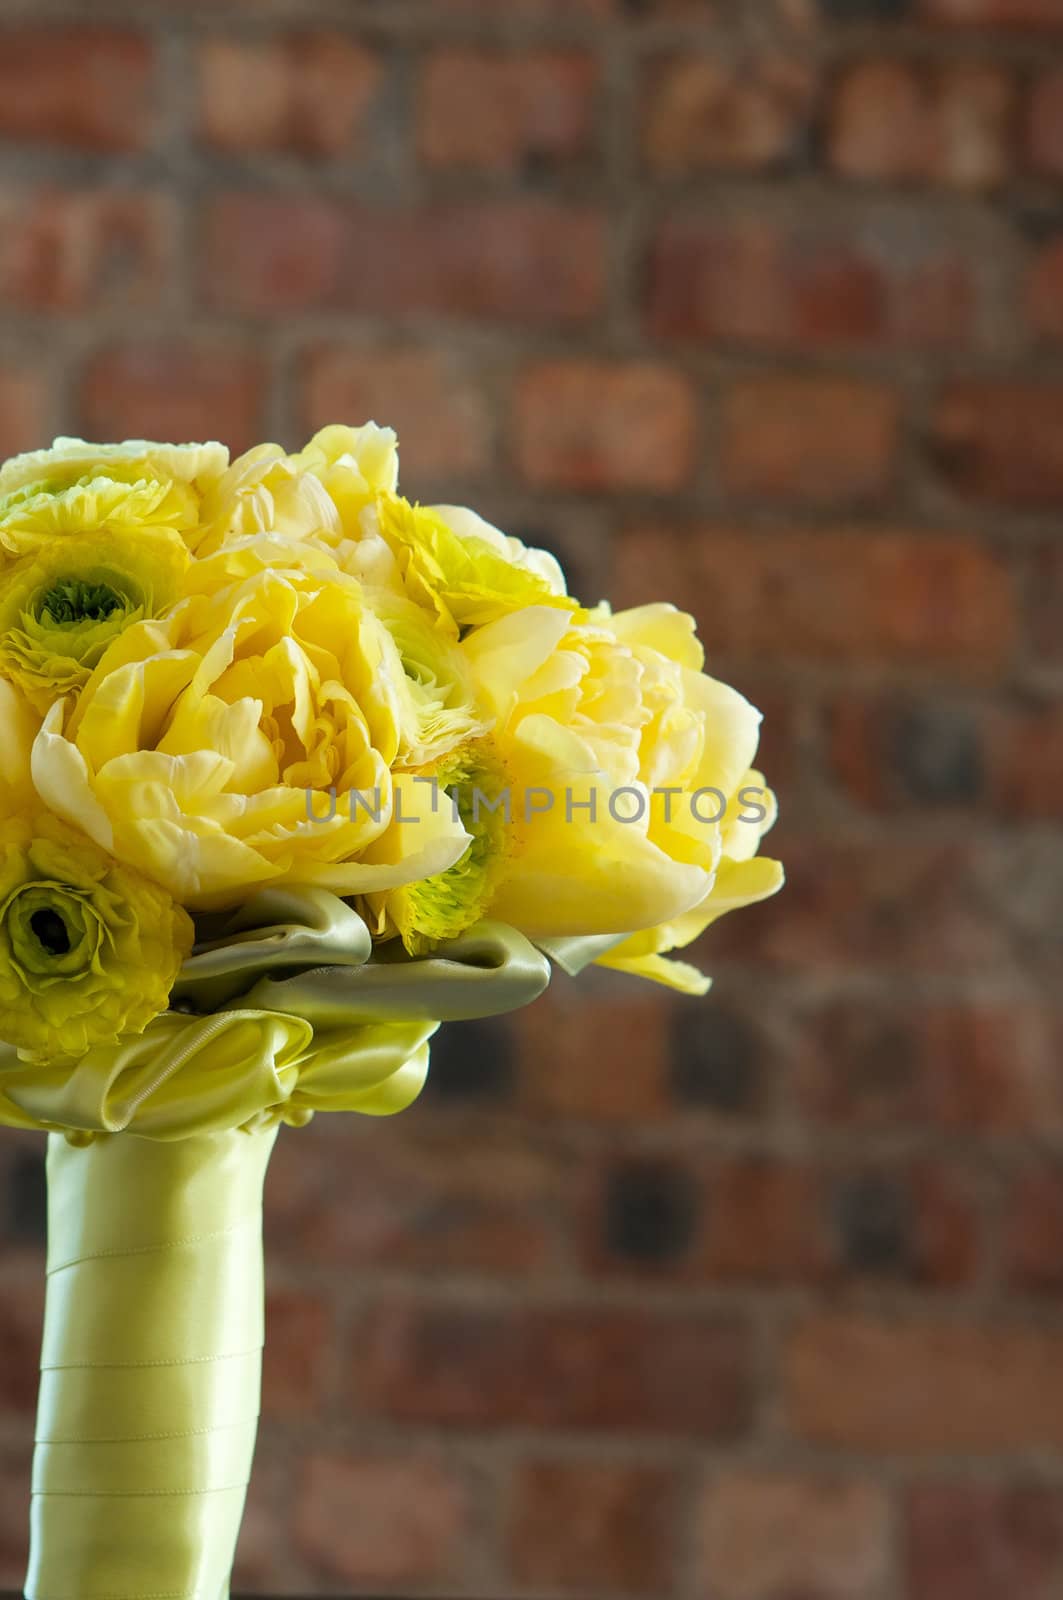 A colorful yellow bridal bouquet of flowers by Deimages